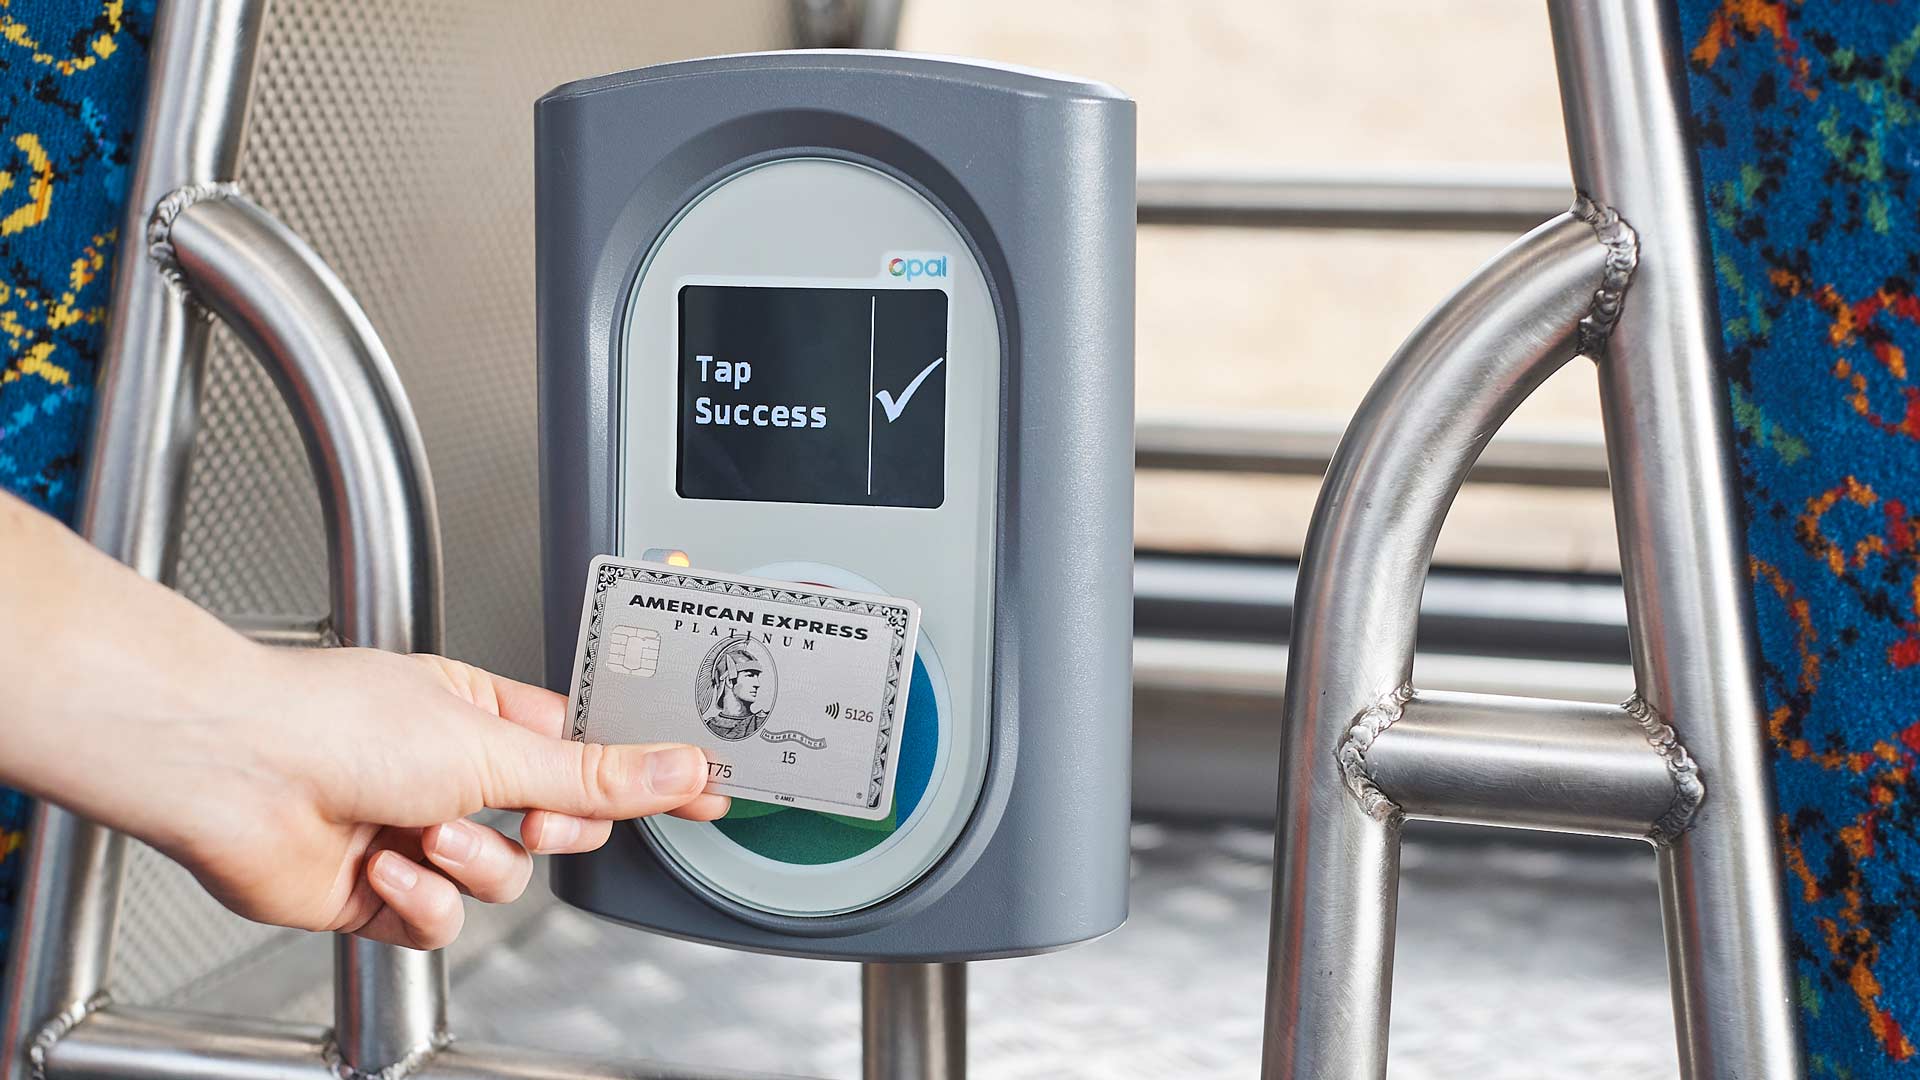 You Can Now Use Your Credit Card to Tap On Across the Entire Sydney Public Transport Network